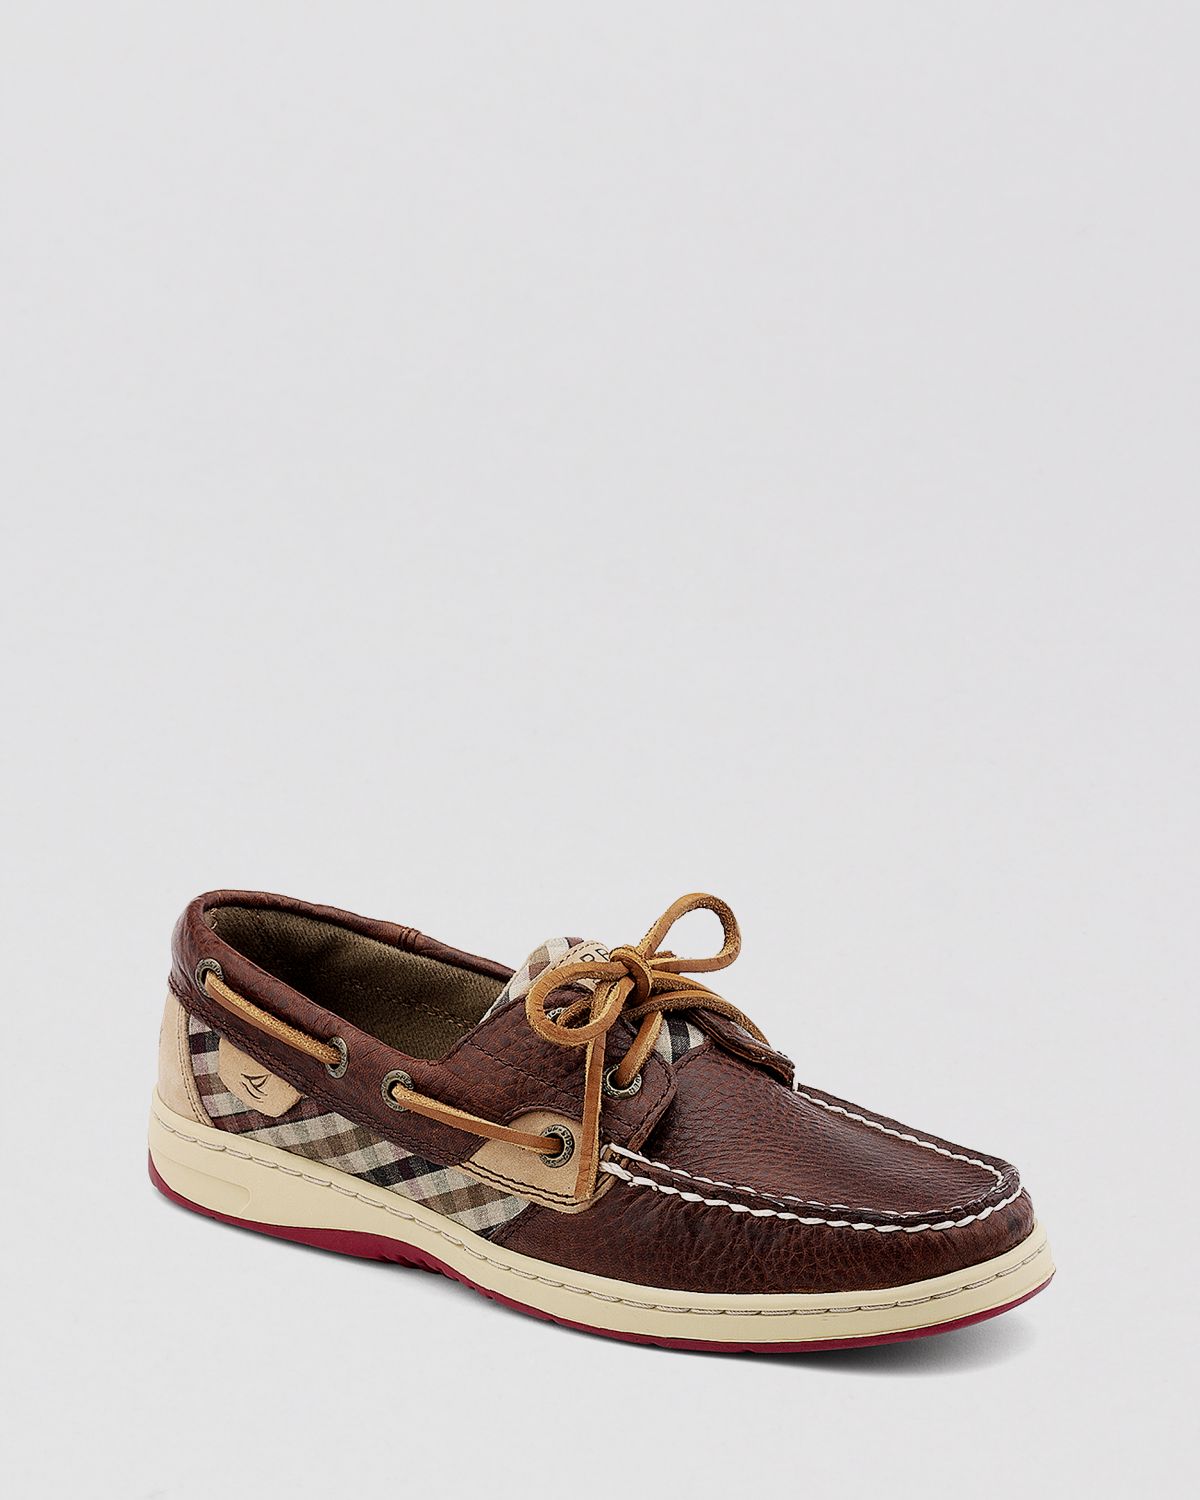 Sperry Top-sider Boat Shoes Bluefish Plaid in Brown (Tan/Oilcloth Check ...